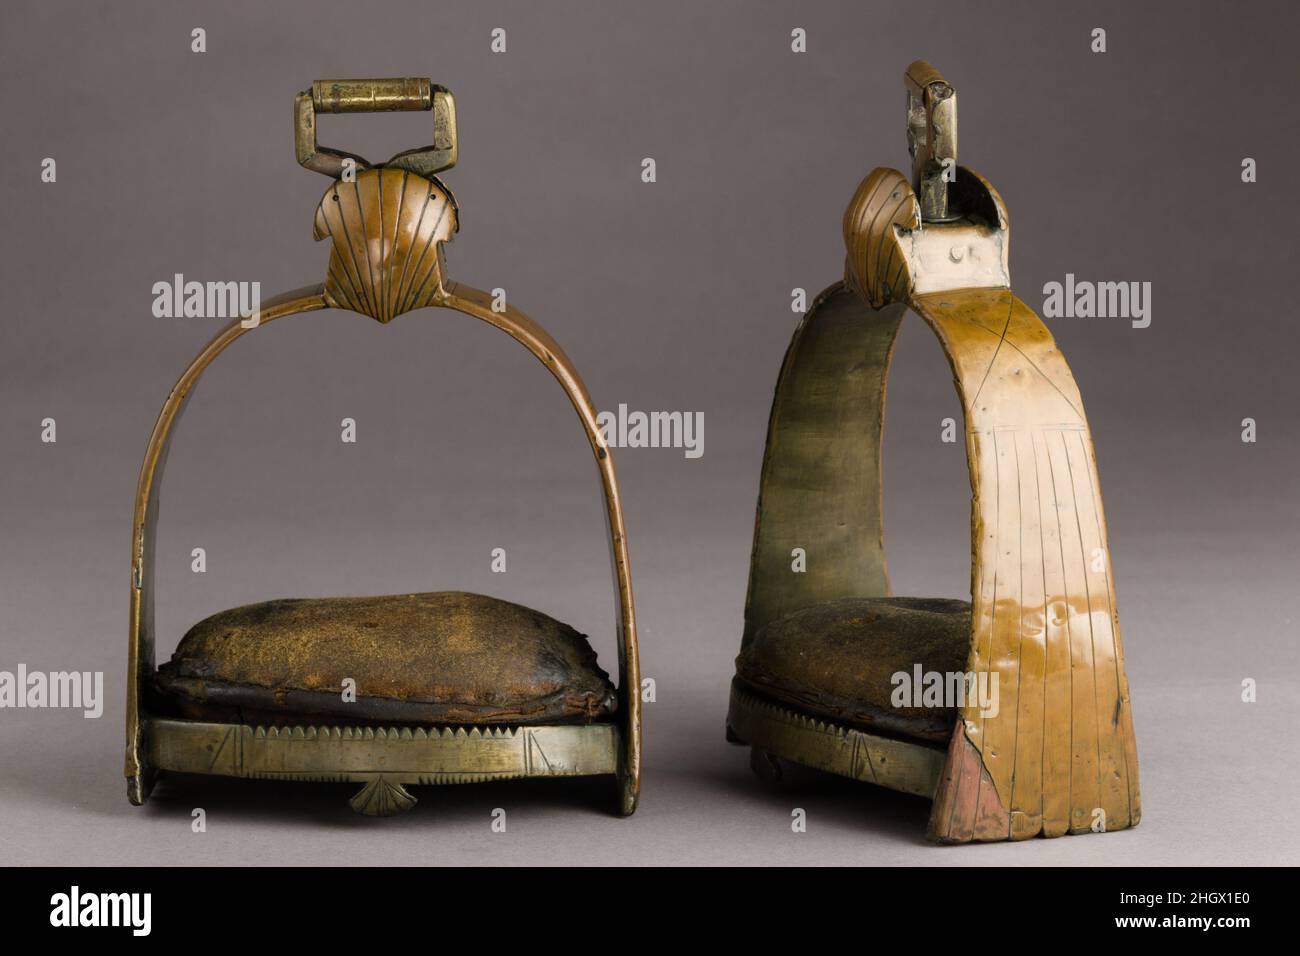 Pair of Stirrups 17th century German The large size of these stirrups is unusual for the period. They may have been used by a postilion, a driver riding one of the carriage horses. However stirrups for this purpose typically had simpler designs. Indeed, to prevent their legs being crushed between the two horses or the central wooden shaft, postilion riders wore heavy oversized reinforced boots, and they consequently needed larger spurs and stirrups. The small leather cushions are also unusual, and may be later additions.. Pair of Stirrups. German. 17th century. Iron, copper alloy, leather. Equ Stock Photo